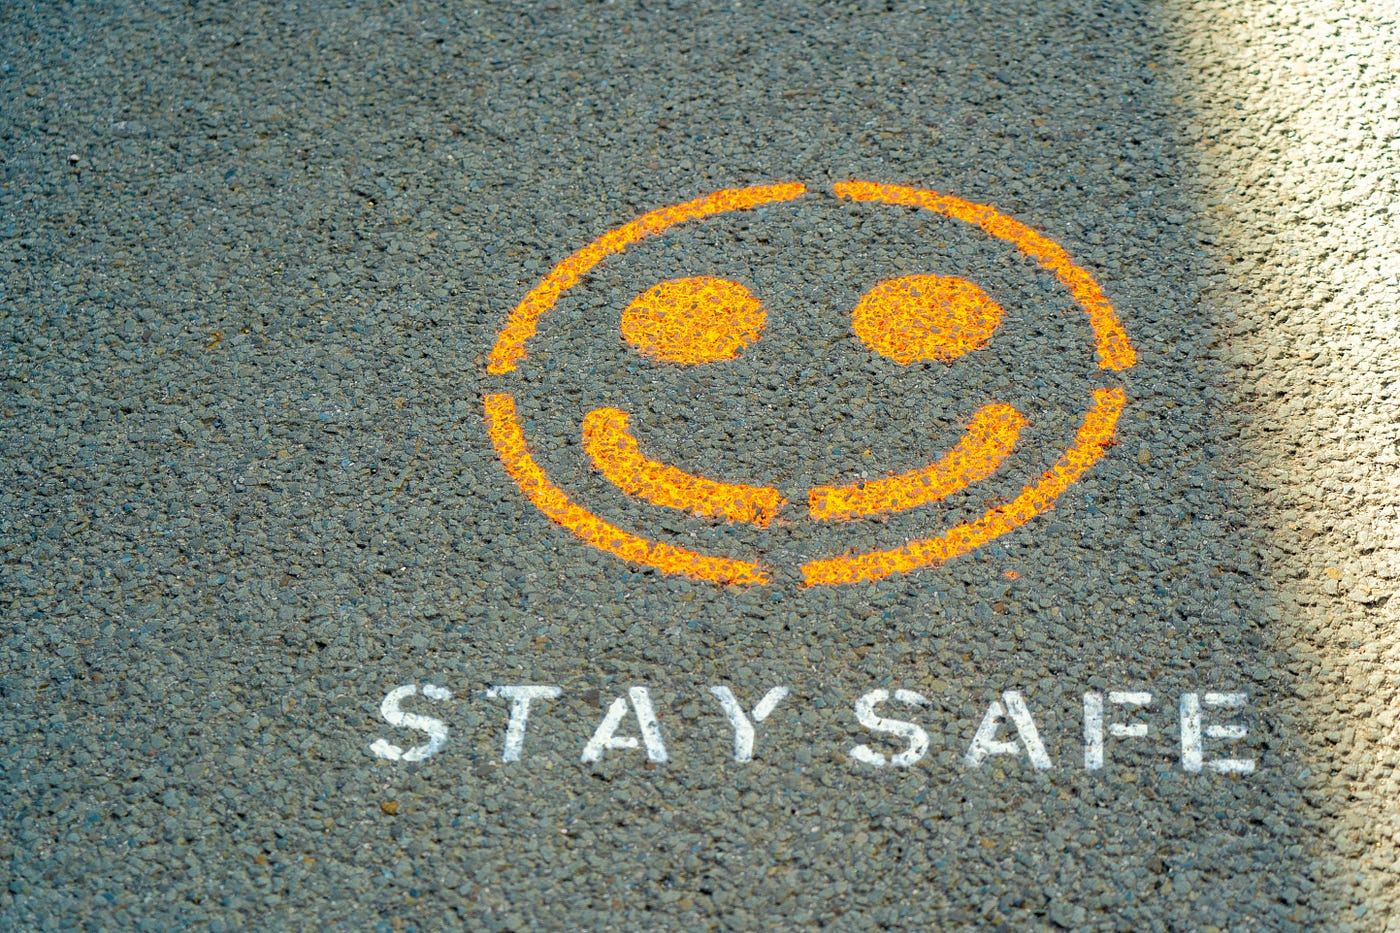 Spray painted on gray pavement are the words “STAY SAFE” in capital letters, colored white. Just above the words, we see a yellow smiley face.